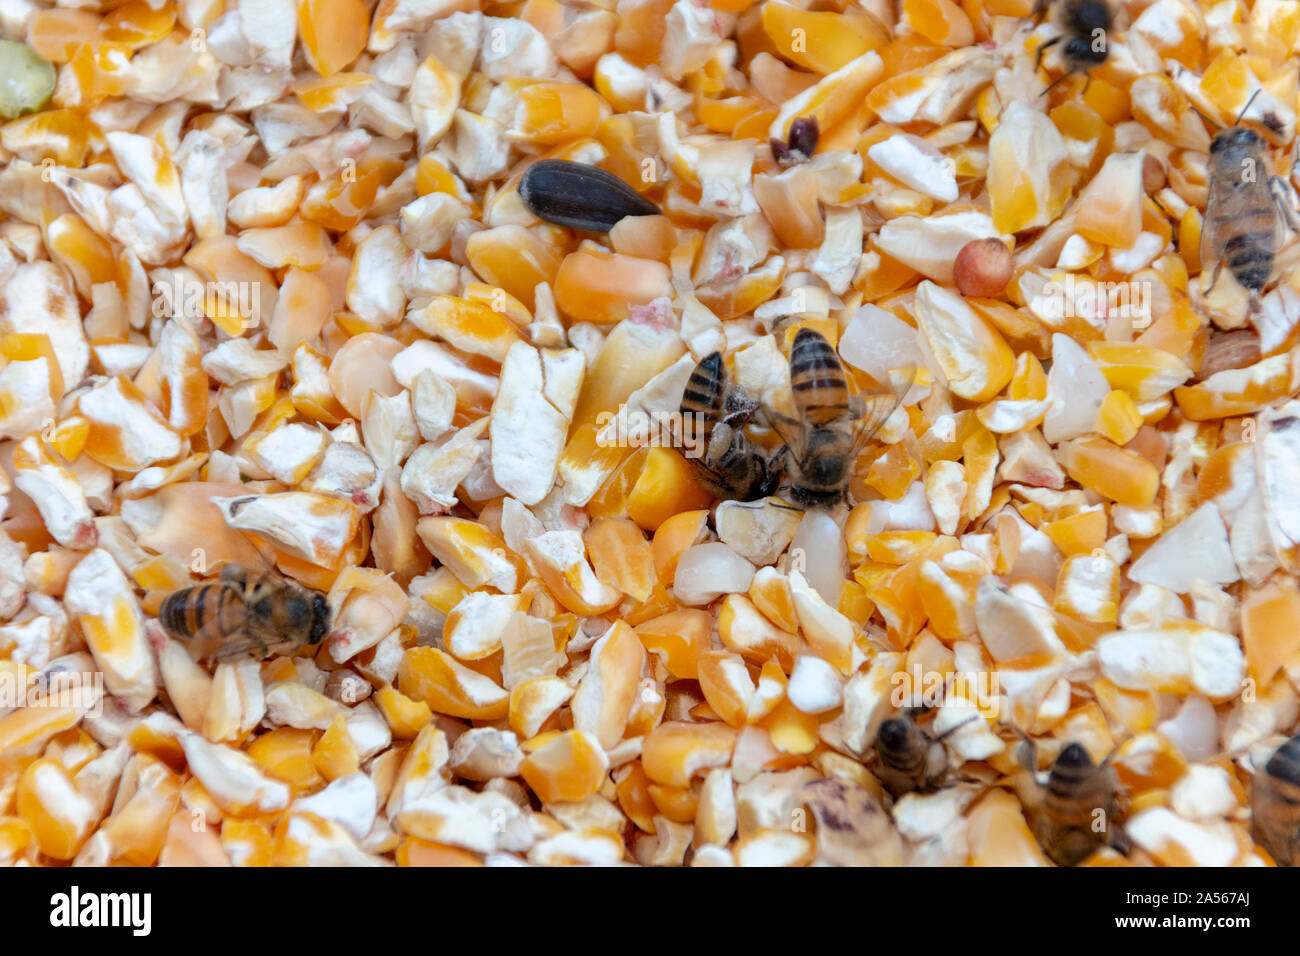 A close up view of swam of honey bees in a container of yellow corn digging nectar and pollen Stock Photo